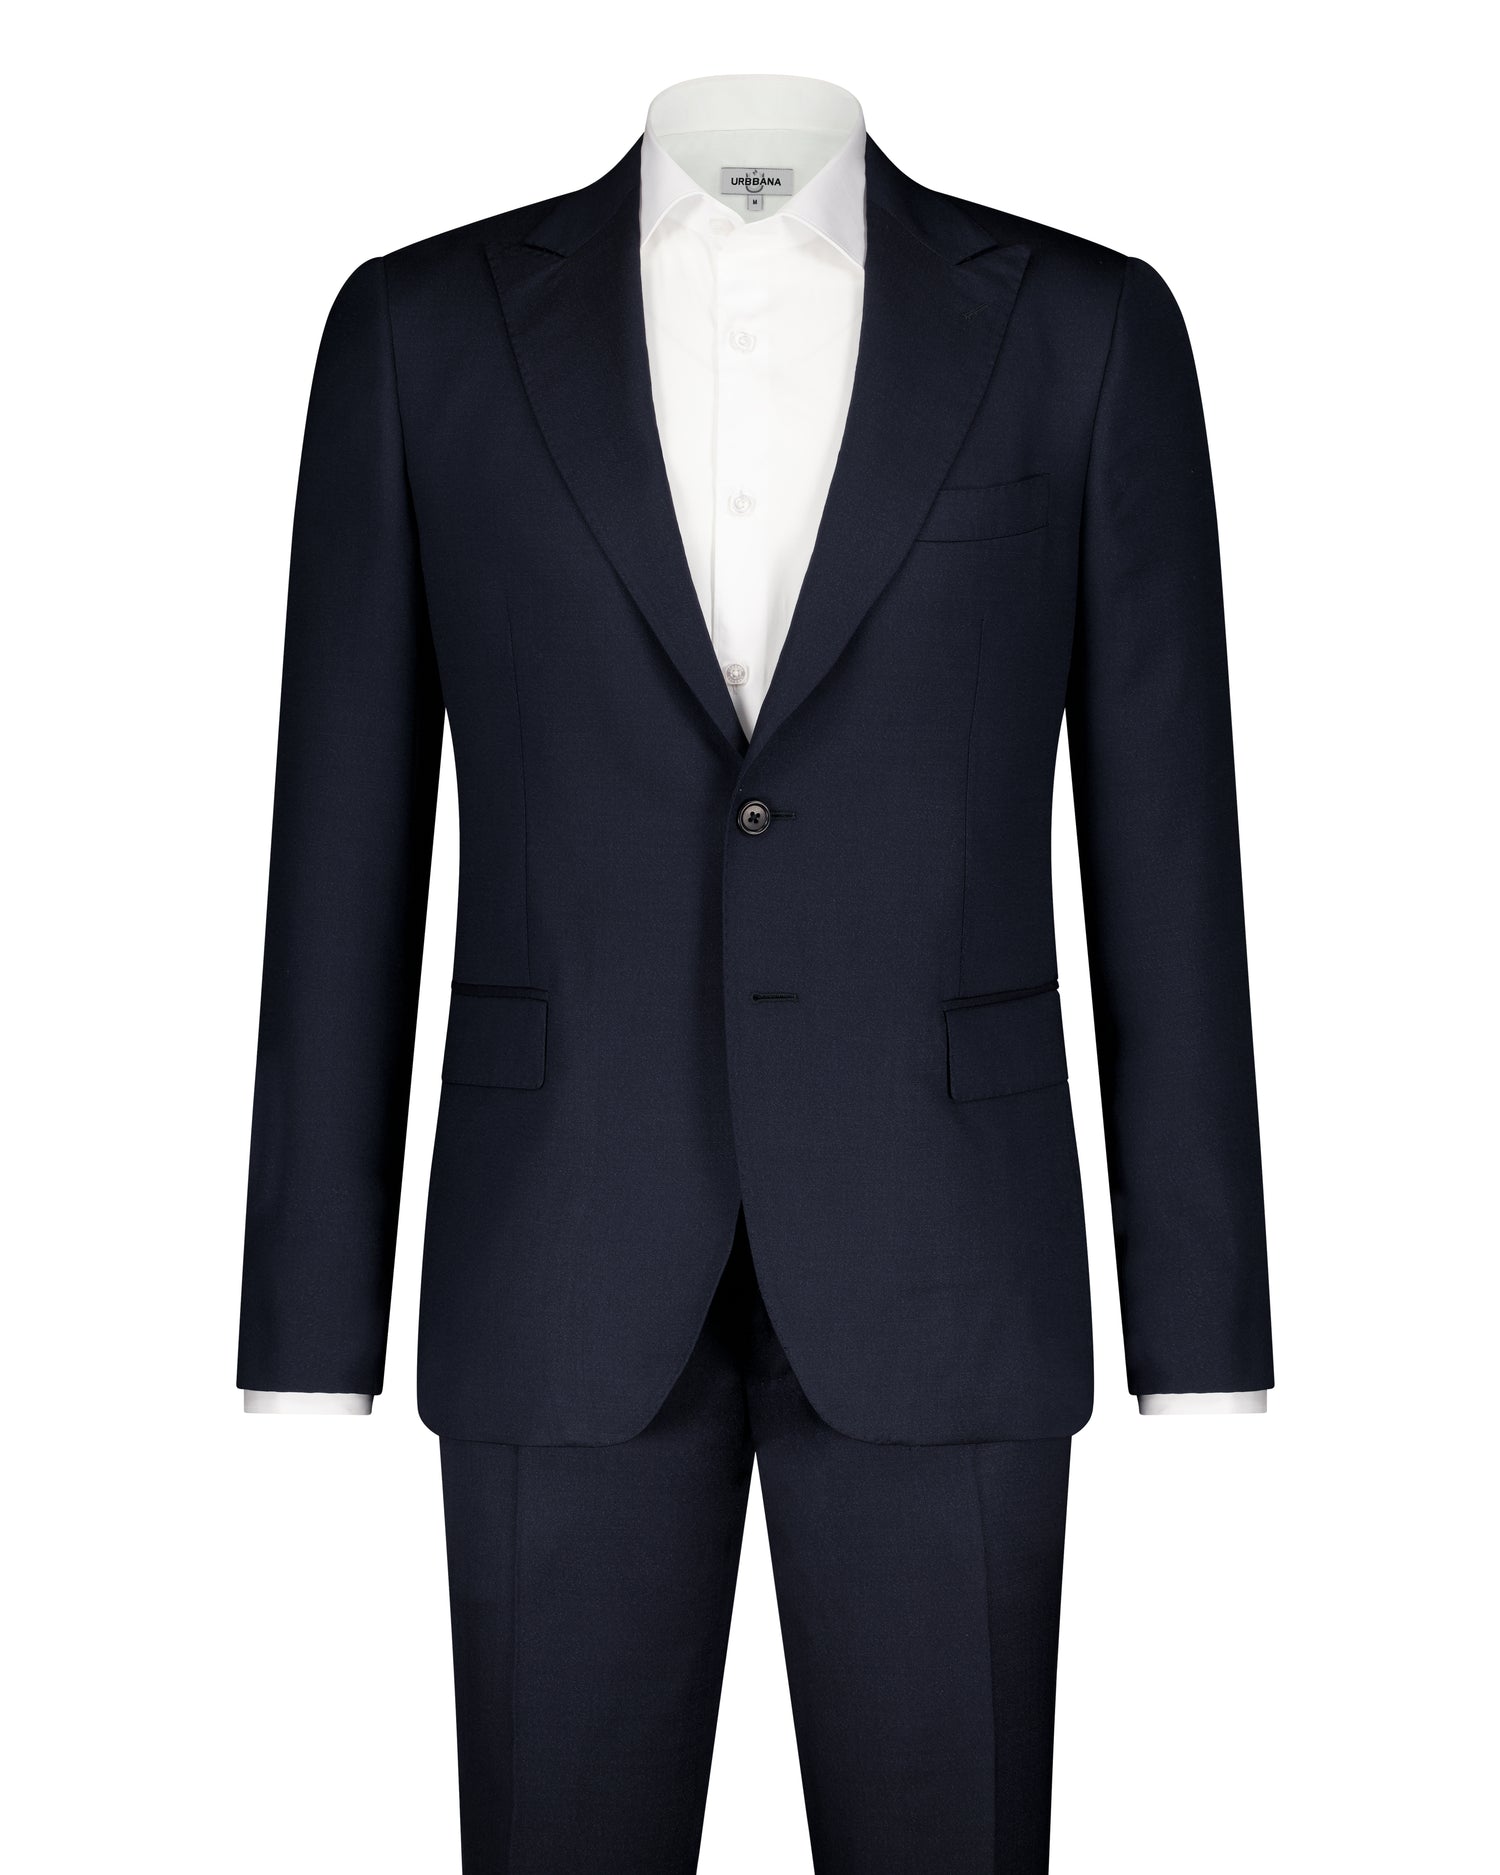 Federico Zegna Cloth Suit - Dark Navy - Made in Italy